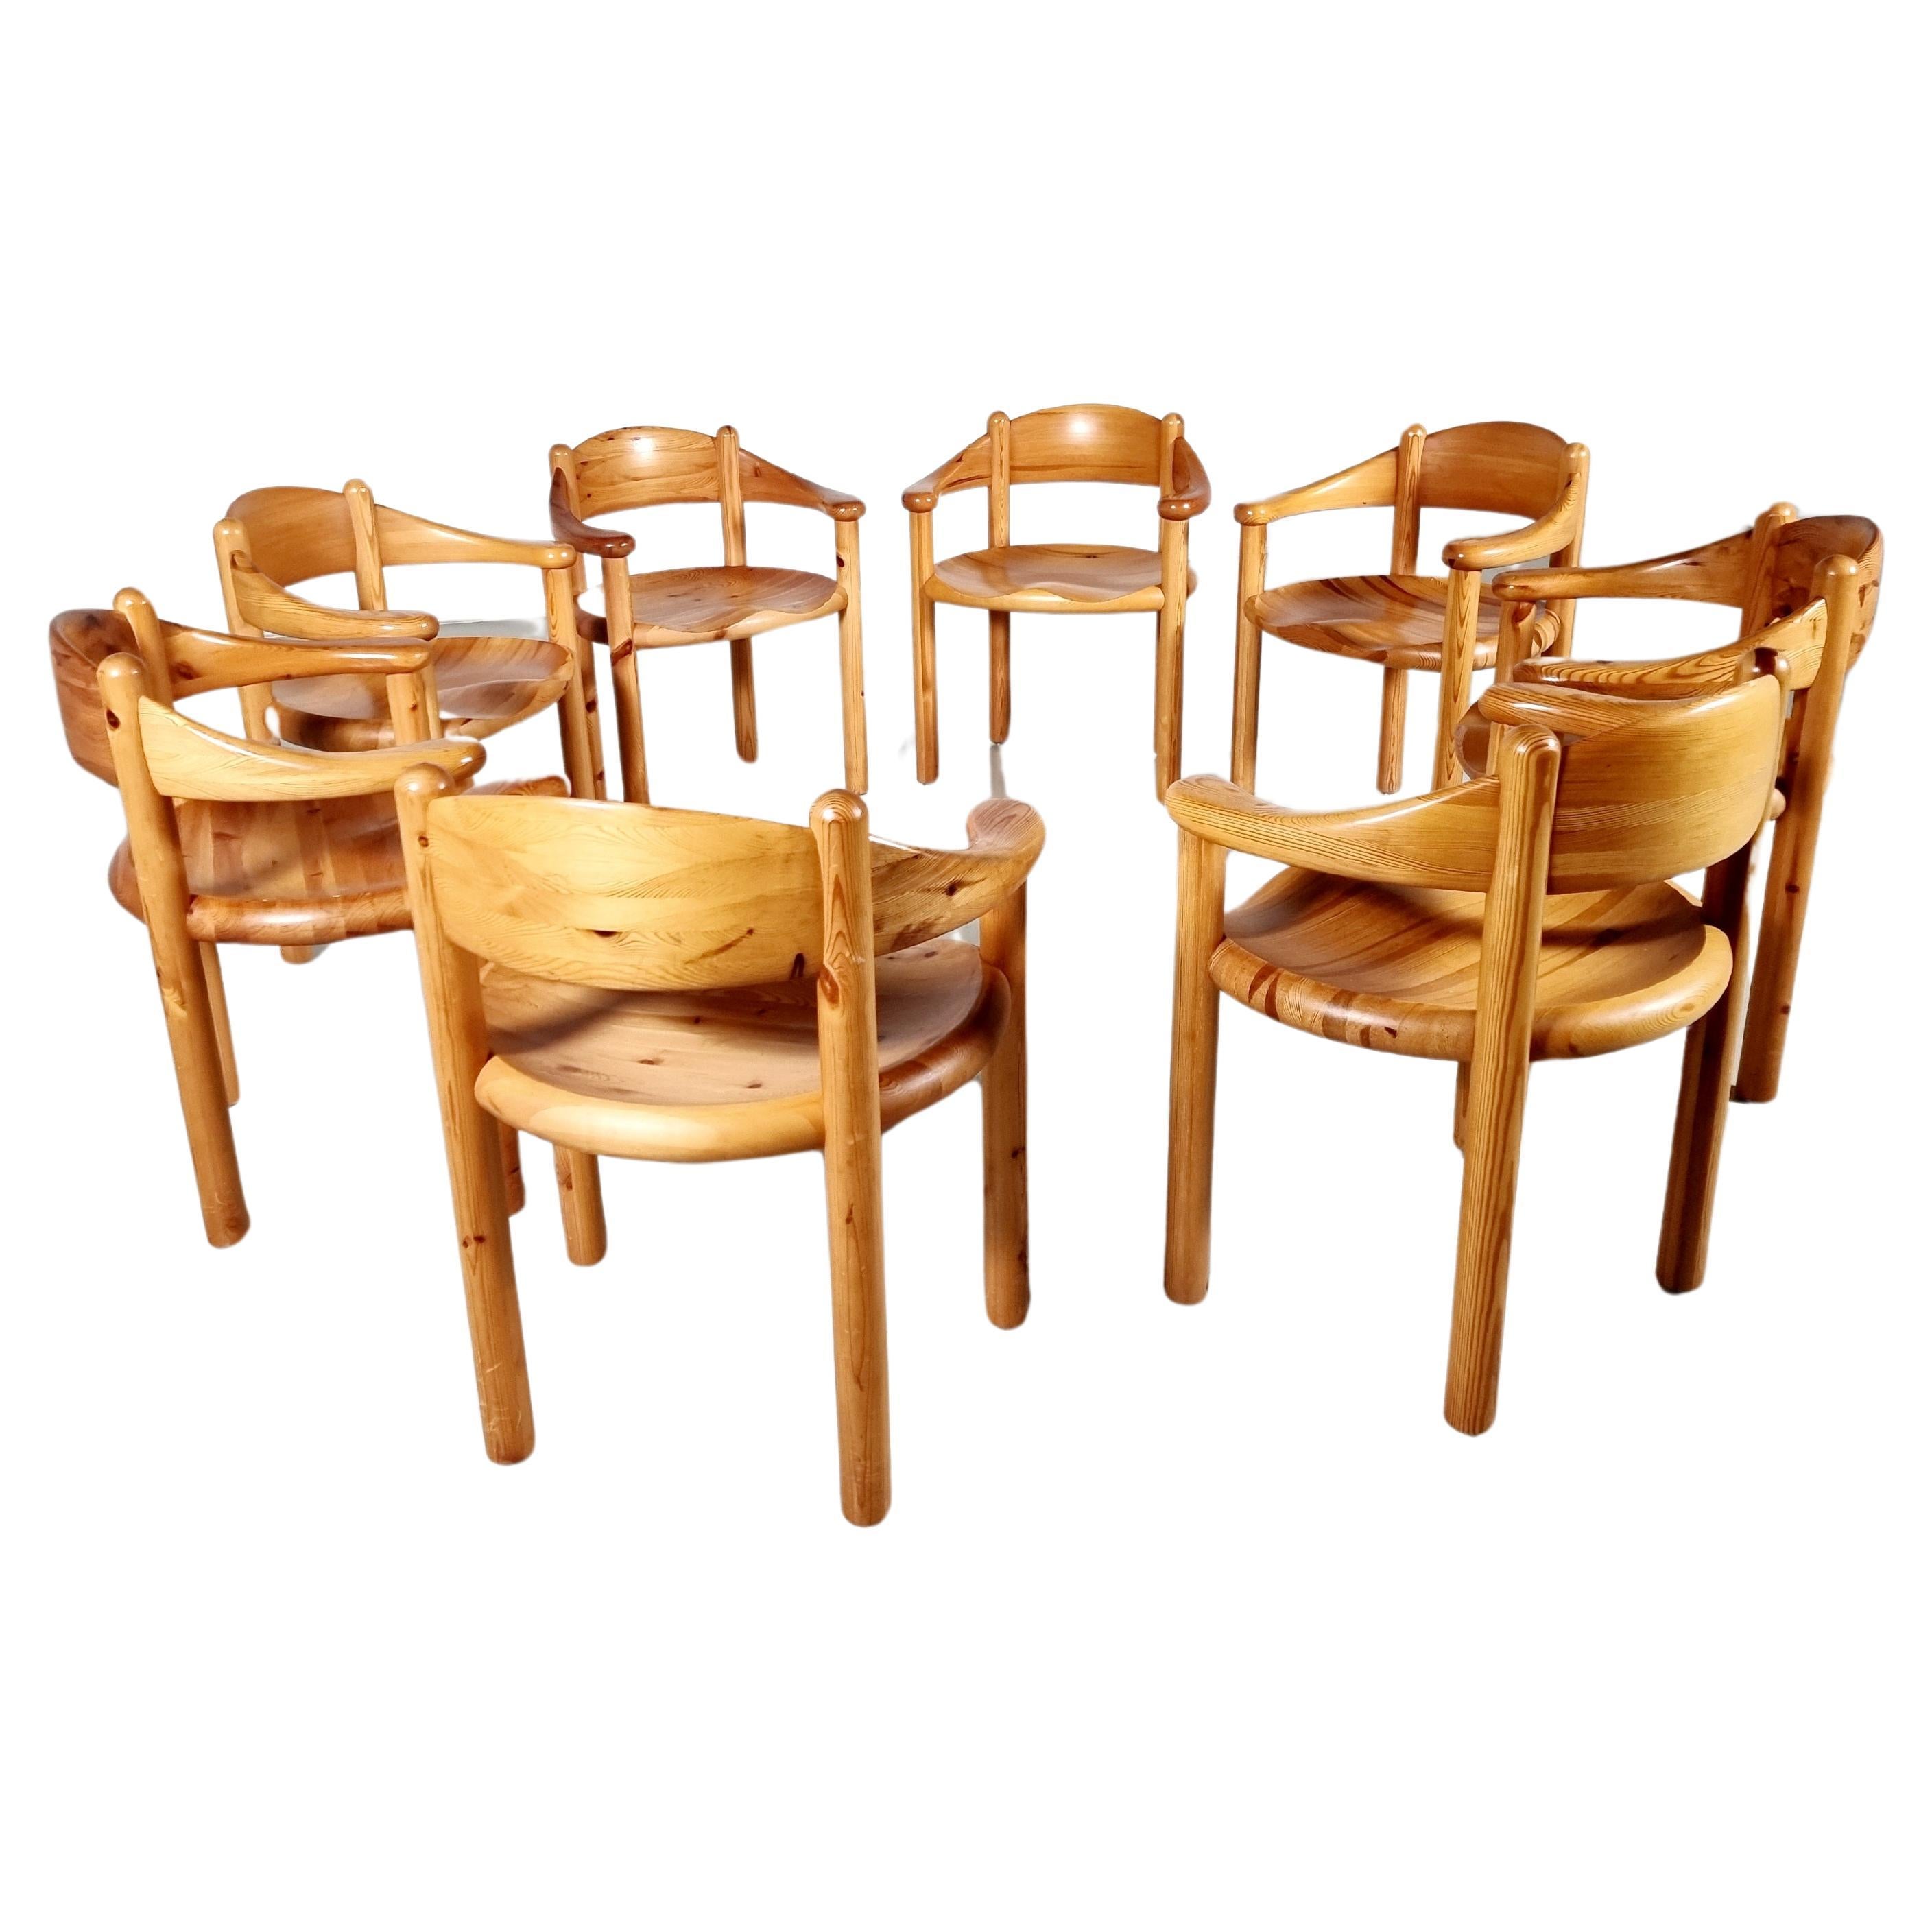 Set of 8 pine wood carver chairs by Rainer Daumiller, 1960s For Sale